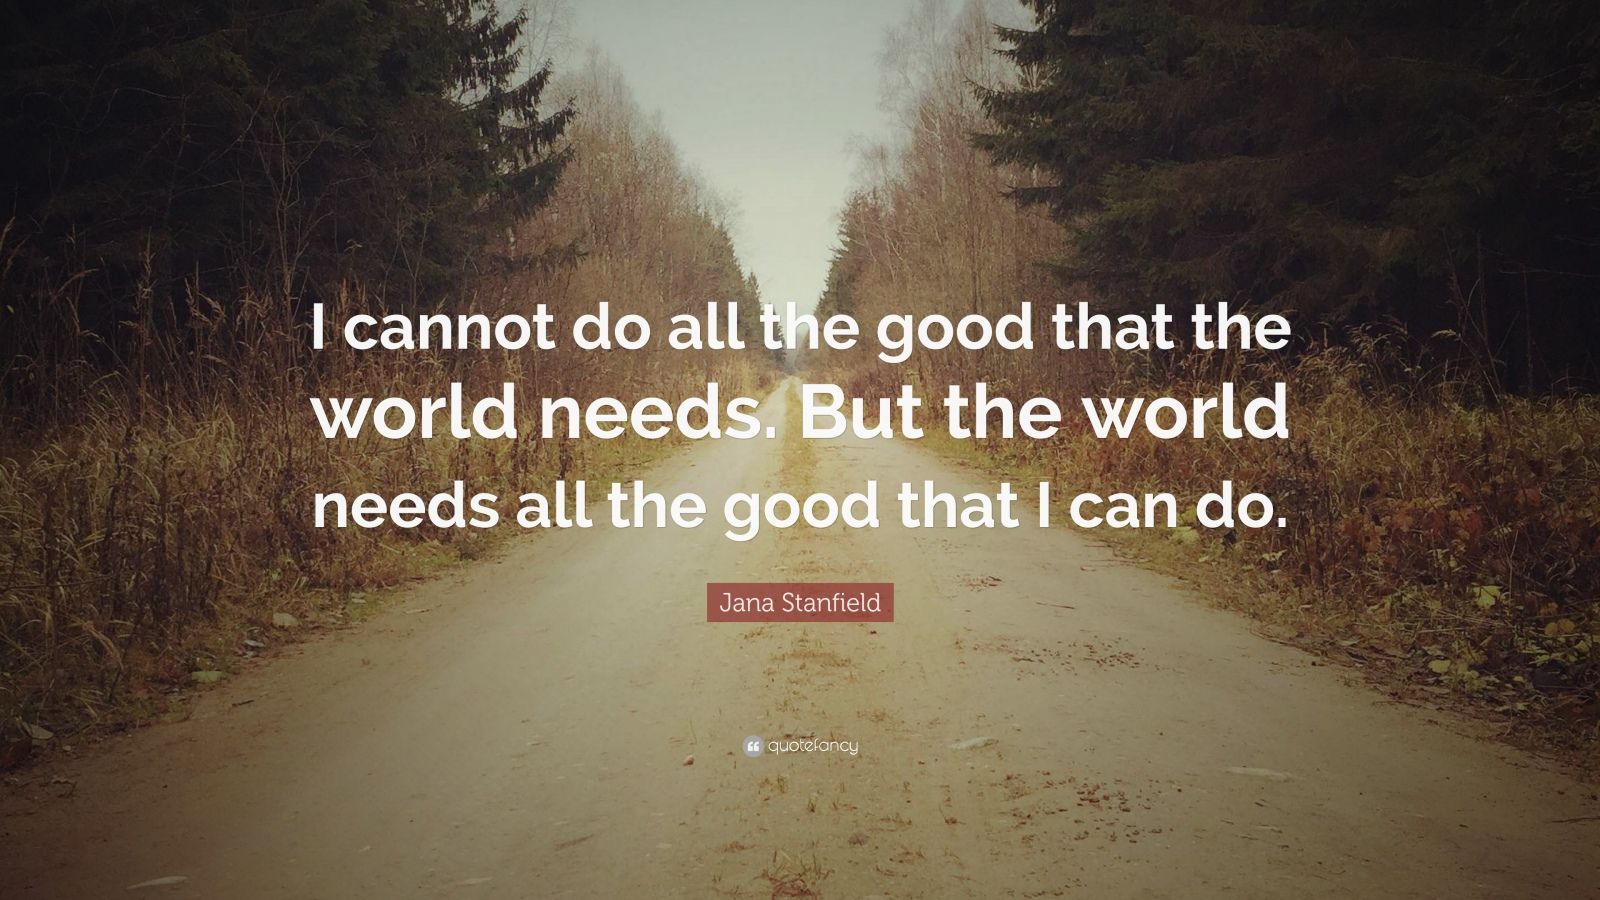 Jana Stanfield Quote: “I cannot do all the good that the world needs